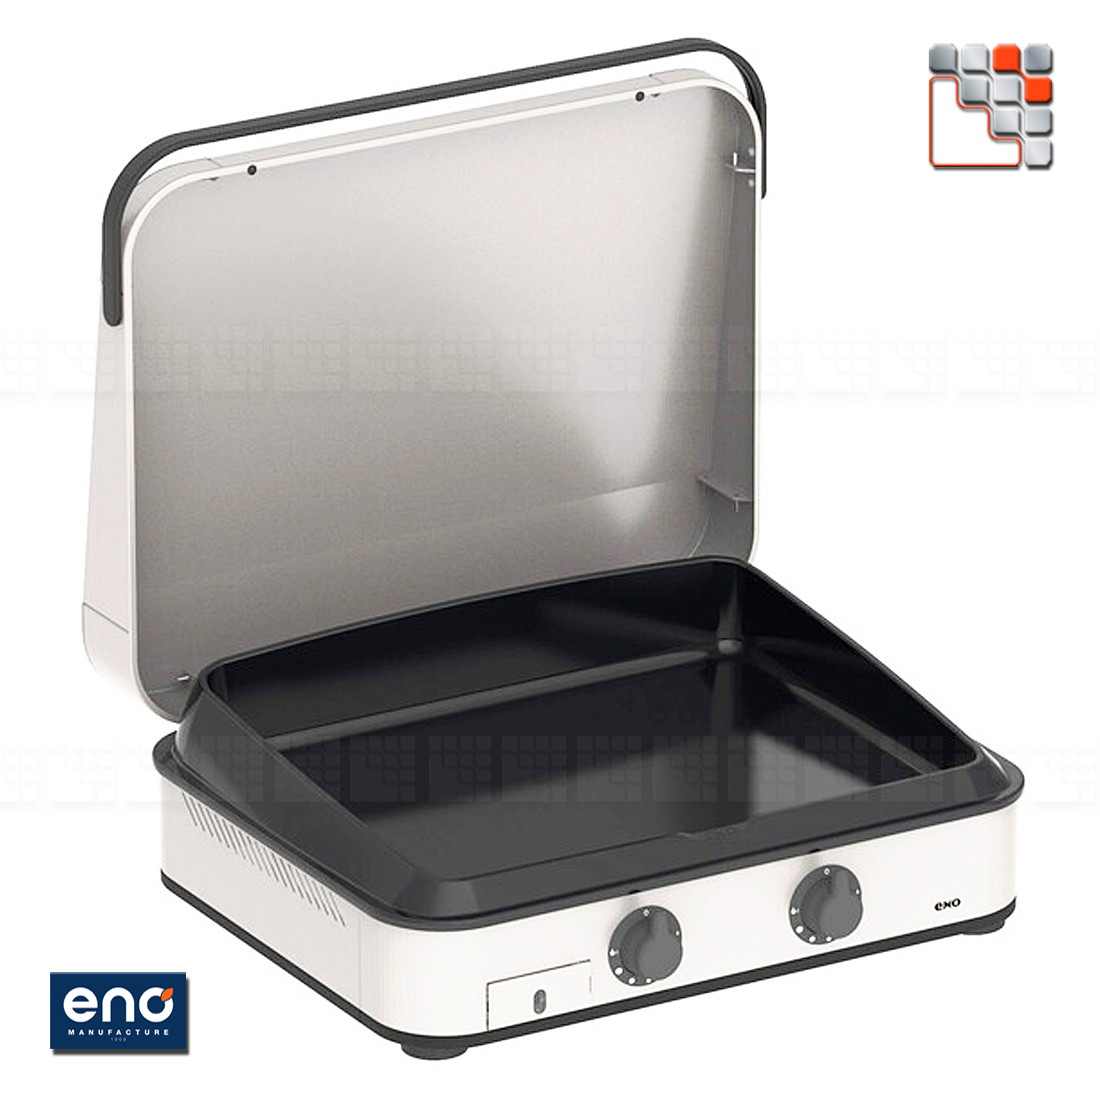 ENOSIGN 65 Stainless steel gas plancha ENO